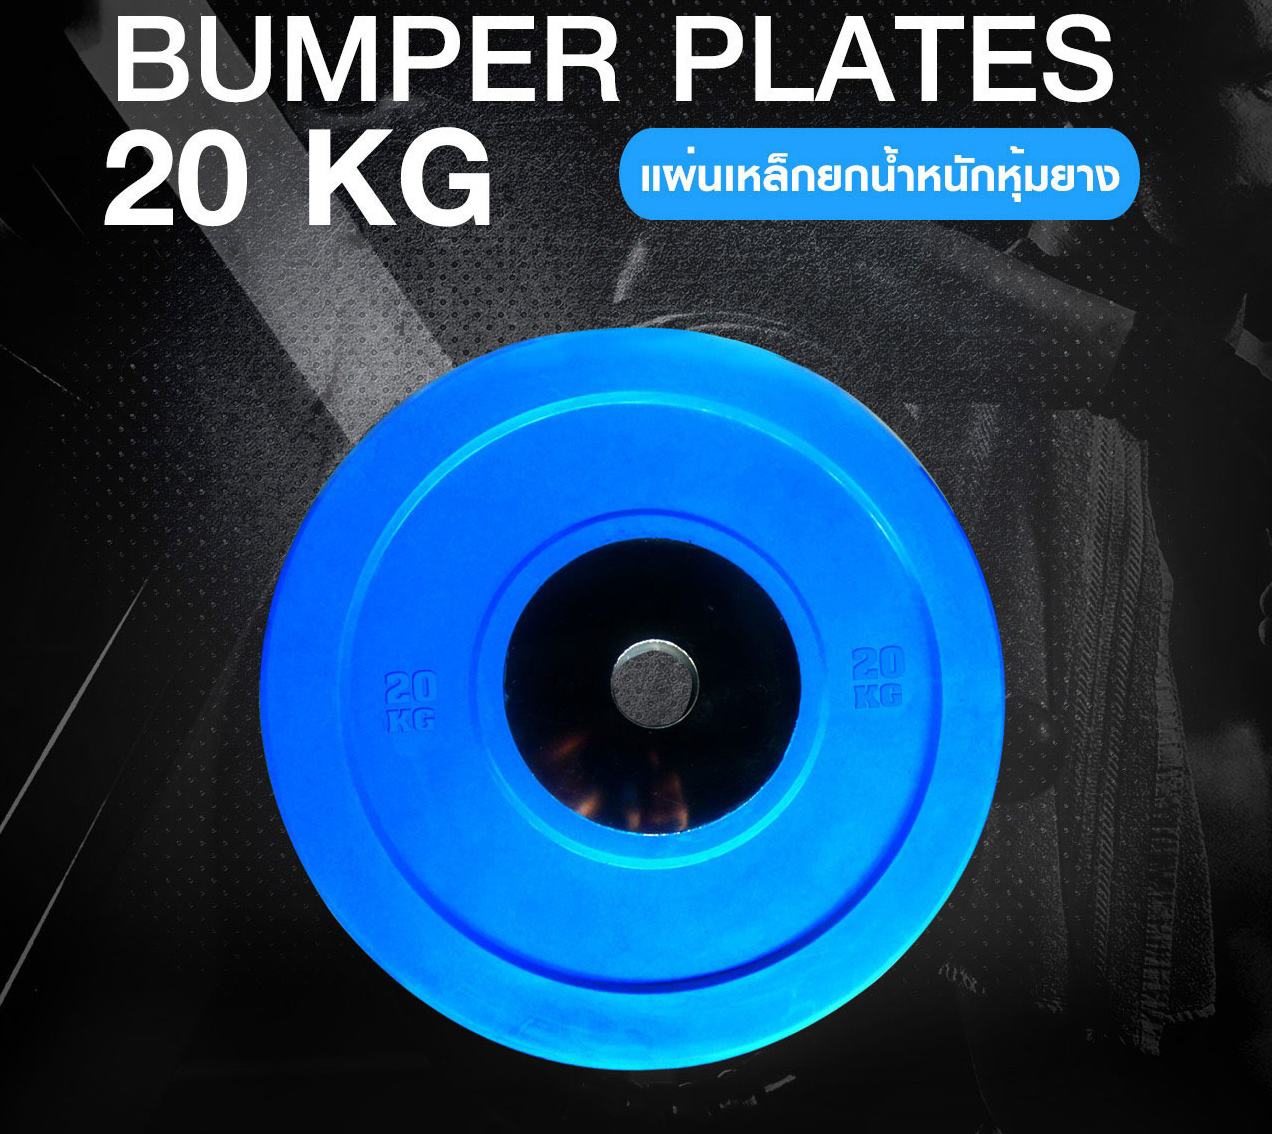 Olympic Weight Plates - BUMPER PLATES - 20 KG